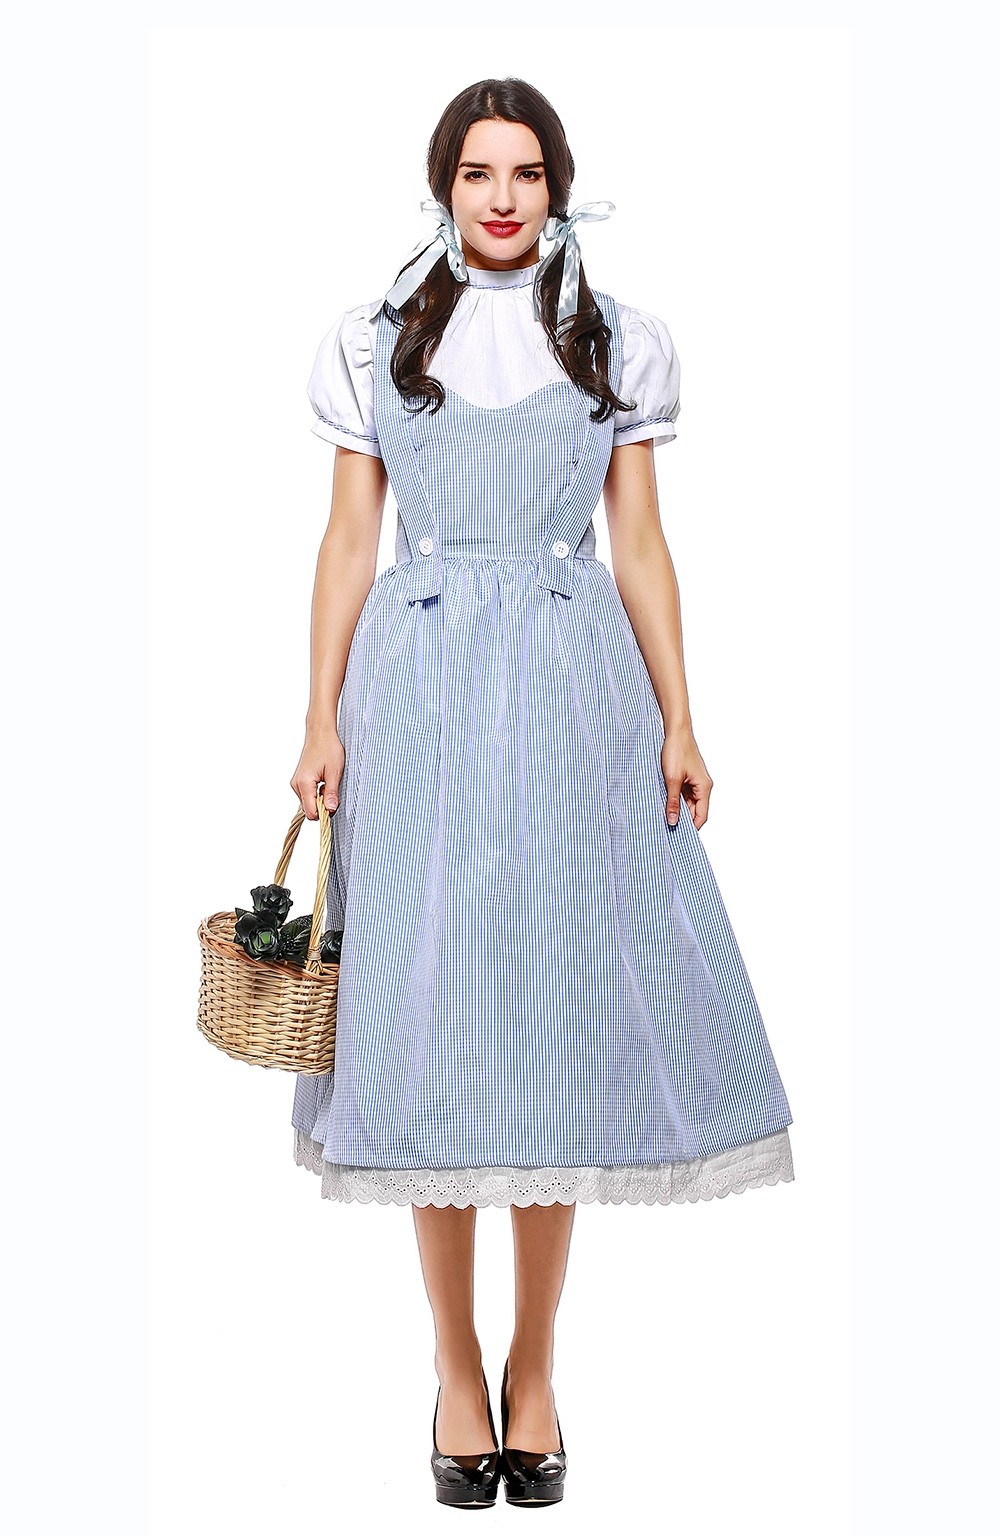 Ladies Dorothy Wizard of OZ Fancy Dress Storybook Hens Party Costume Outfit 